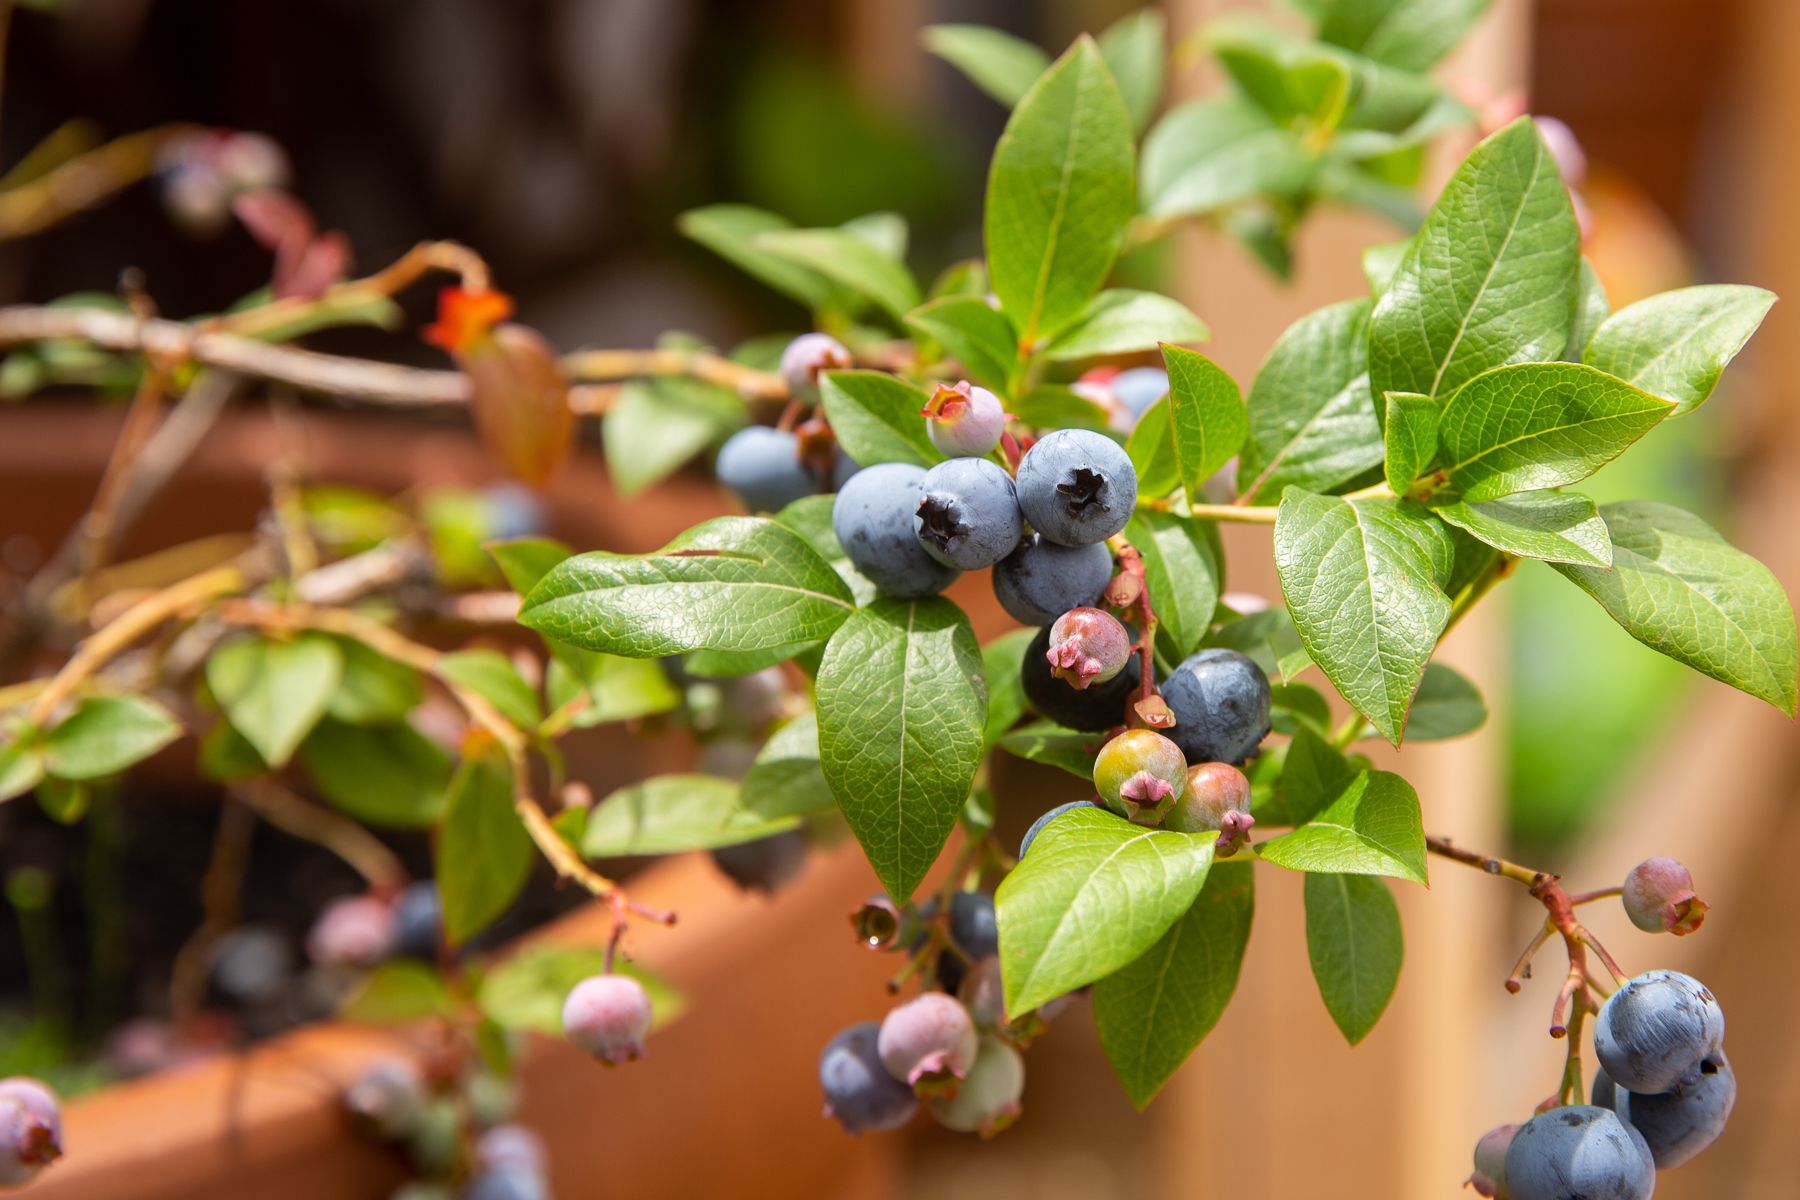 How to Grow Berries in Containers